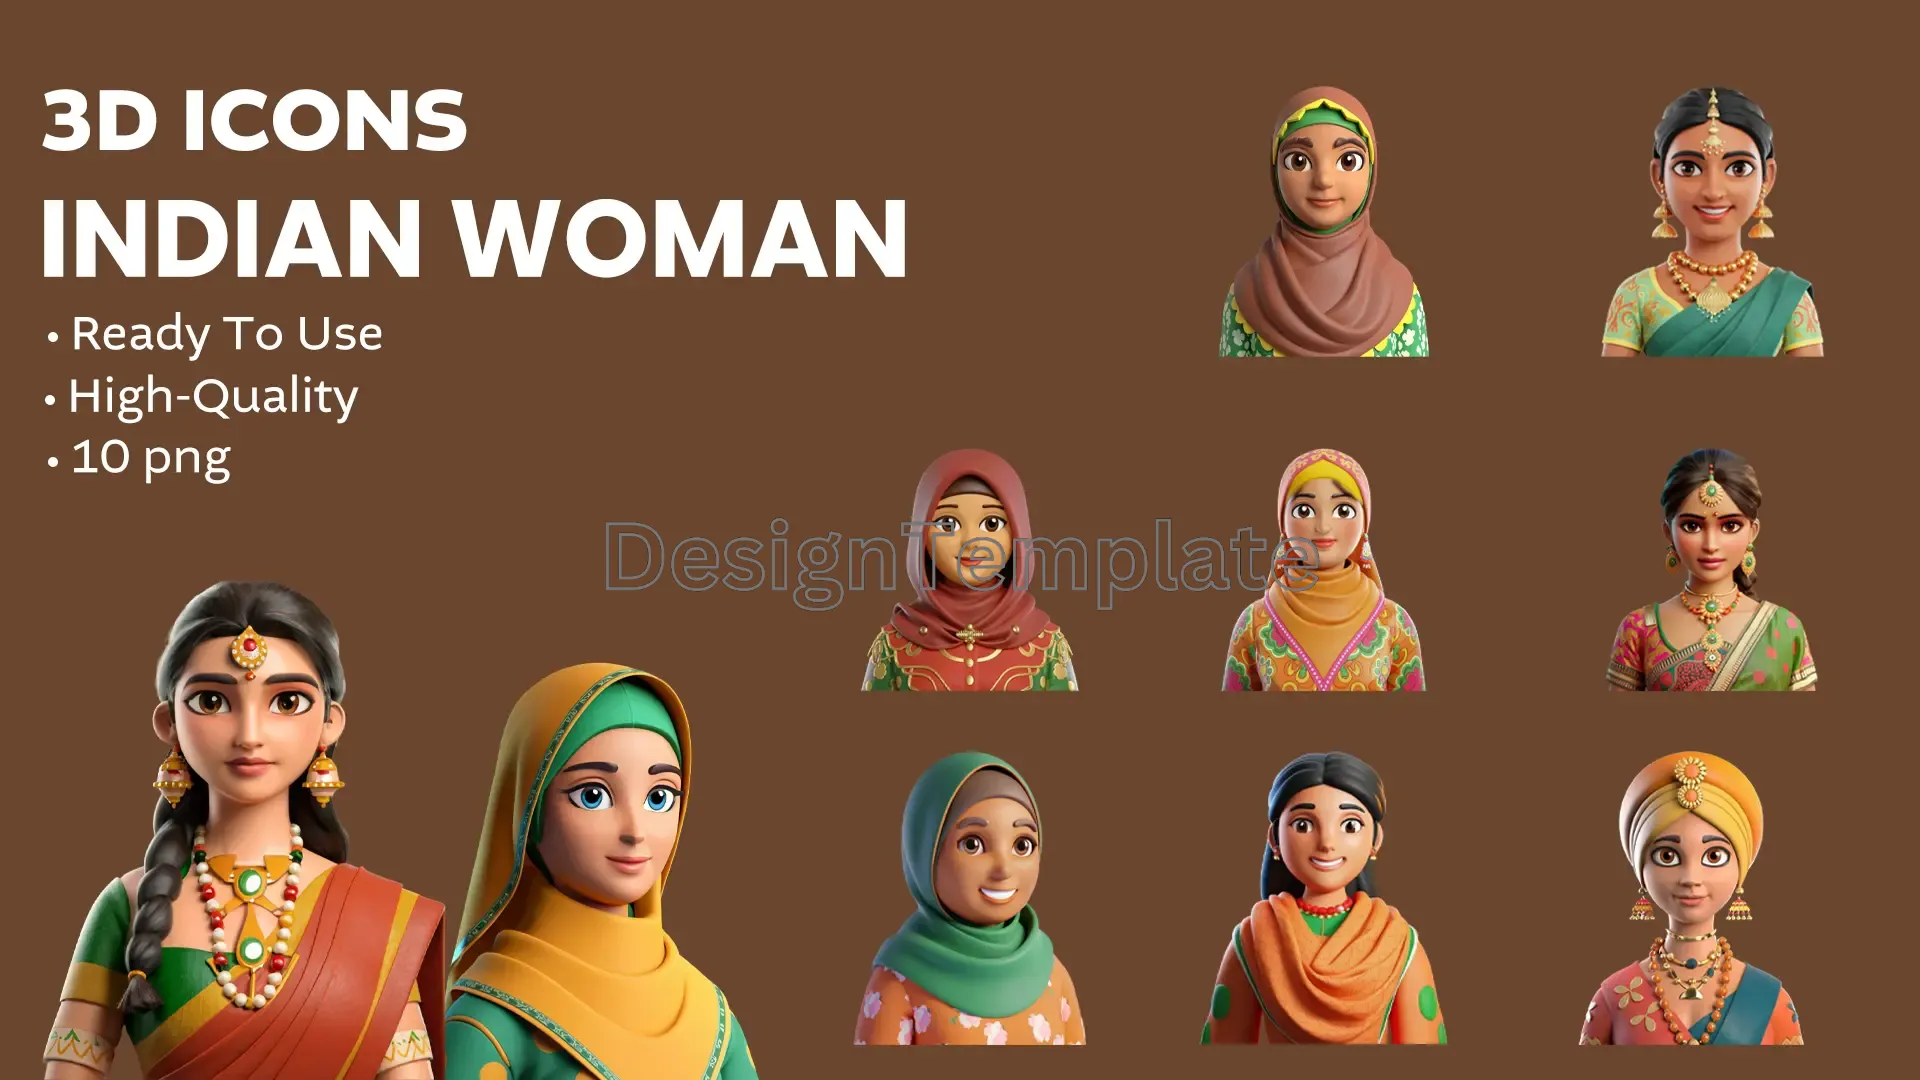 Traditional Indian Women 3D Art Elements Pack image